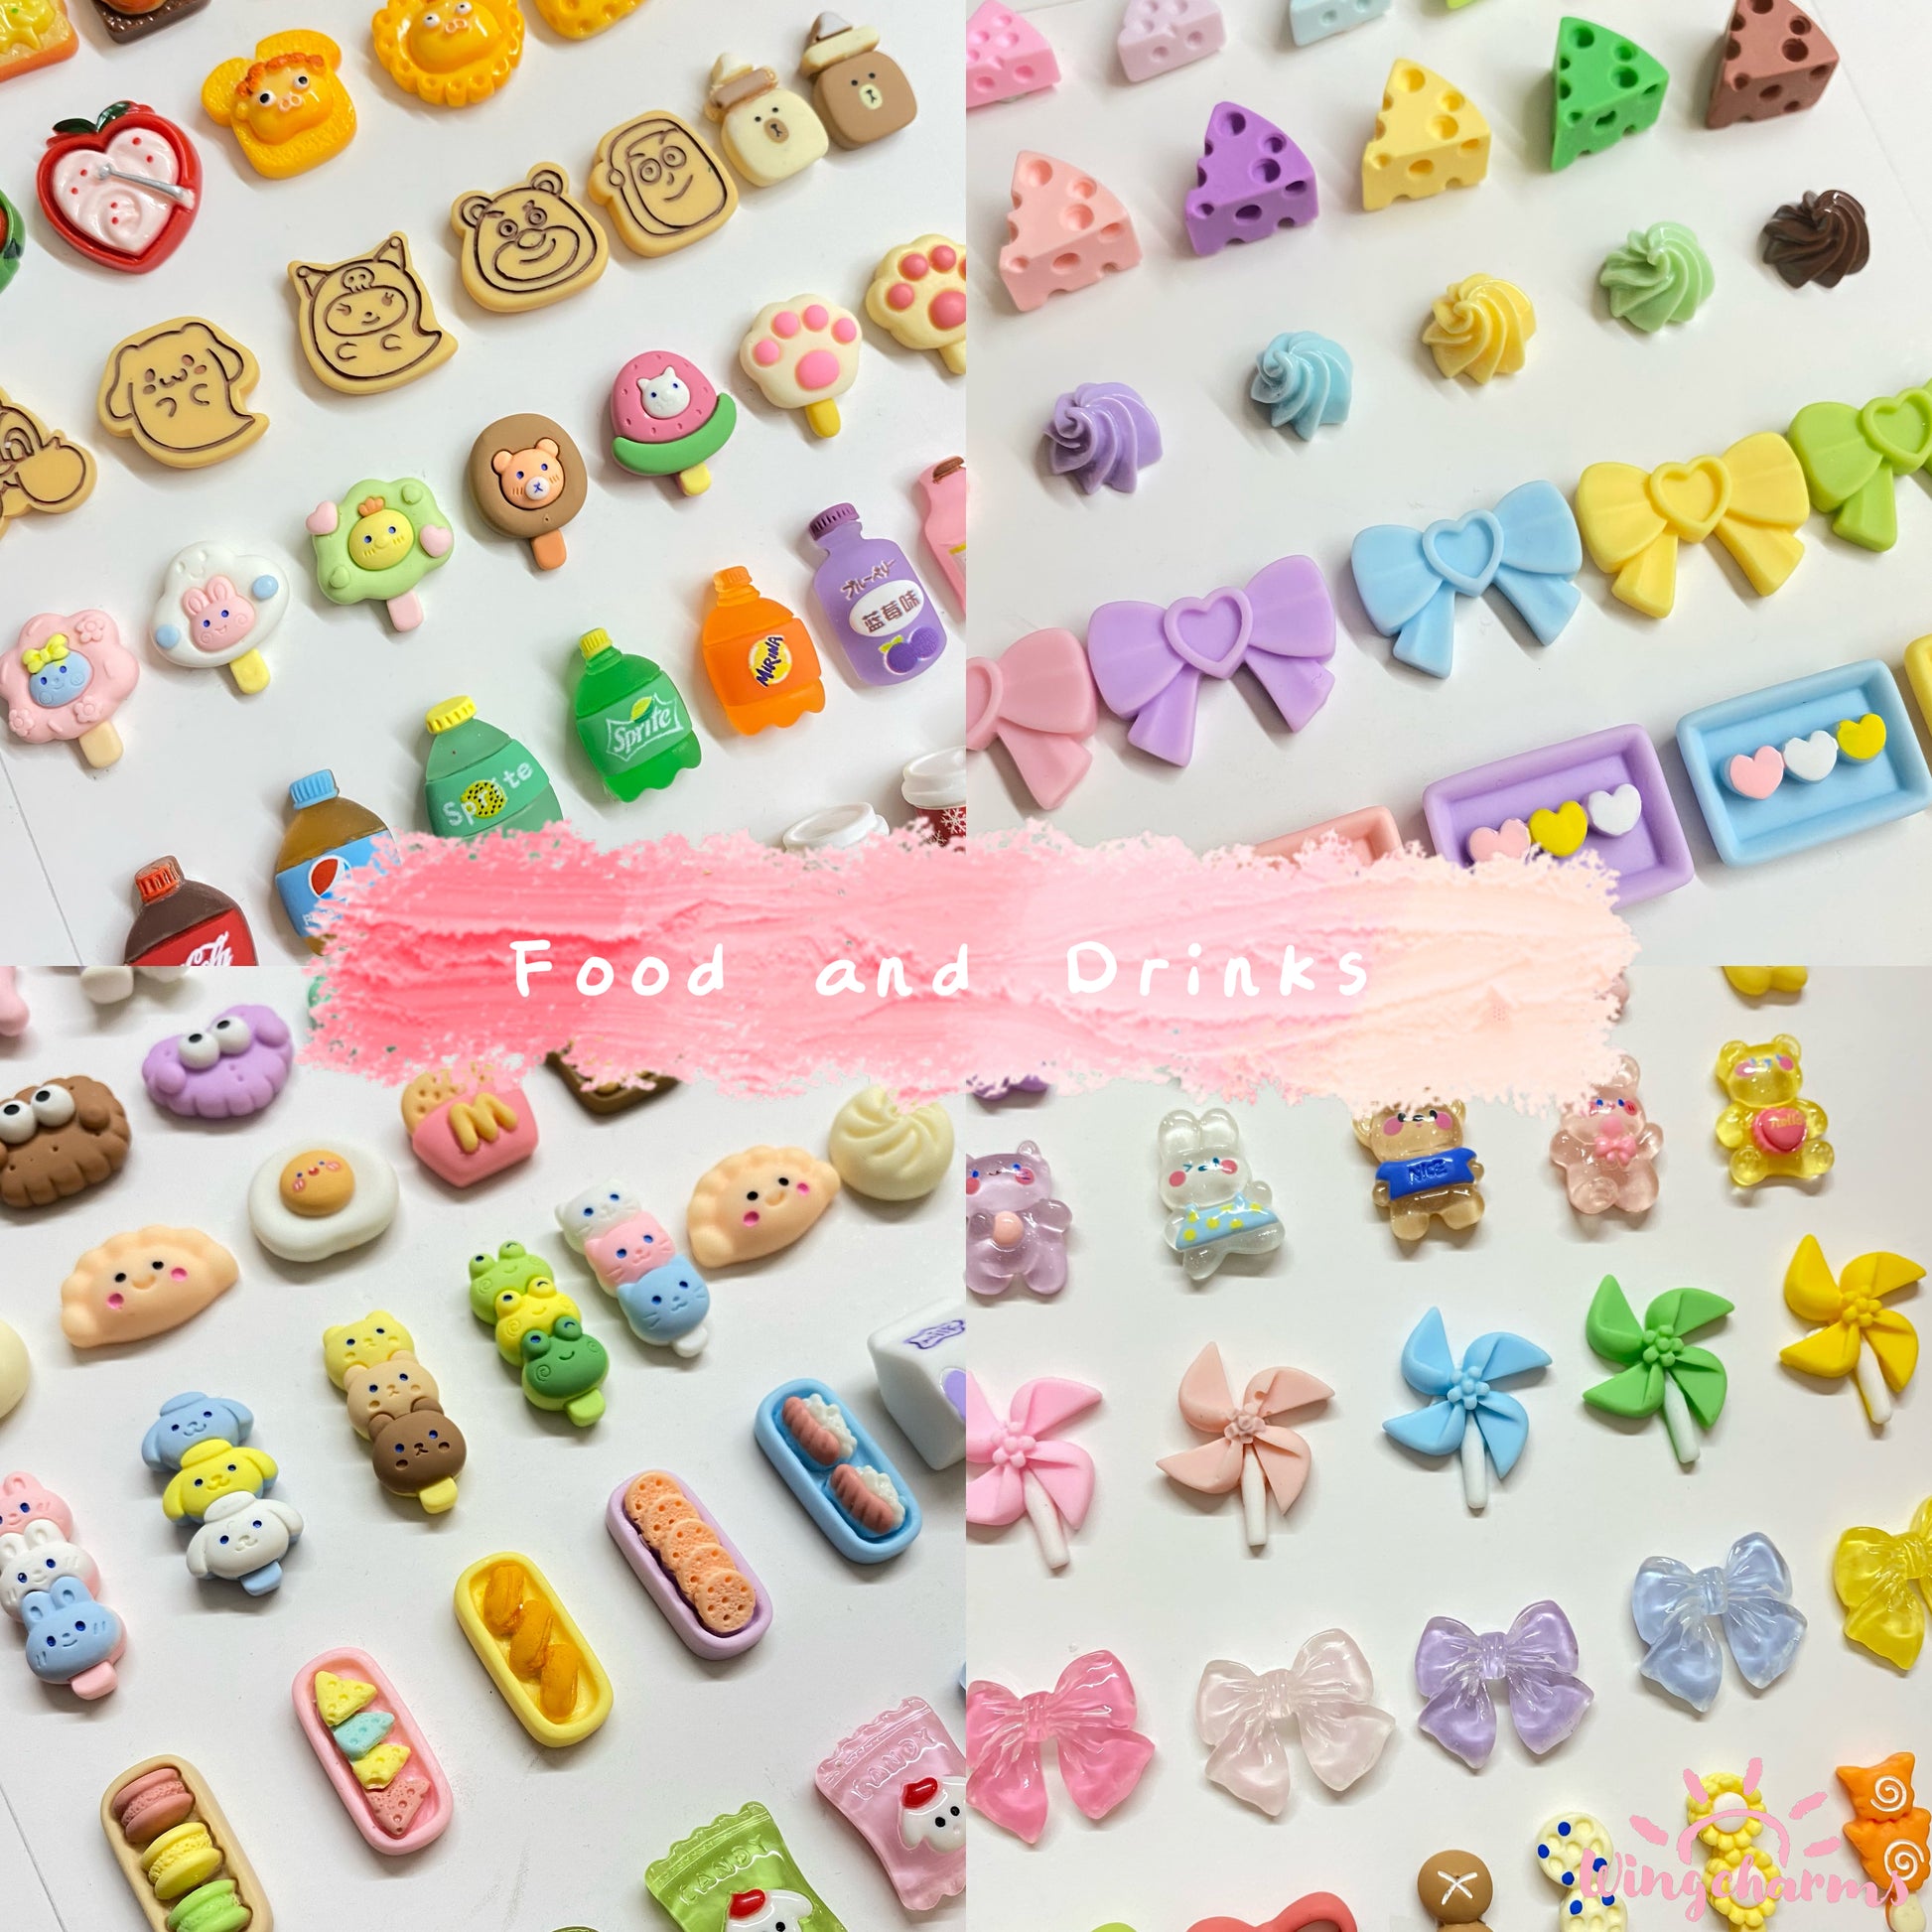 Macaroons(3pcs)- Decoden supplies charms and cabochons